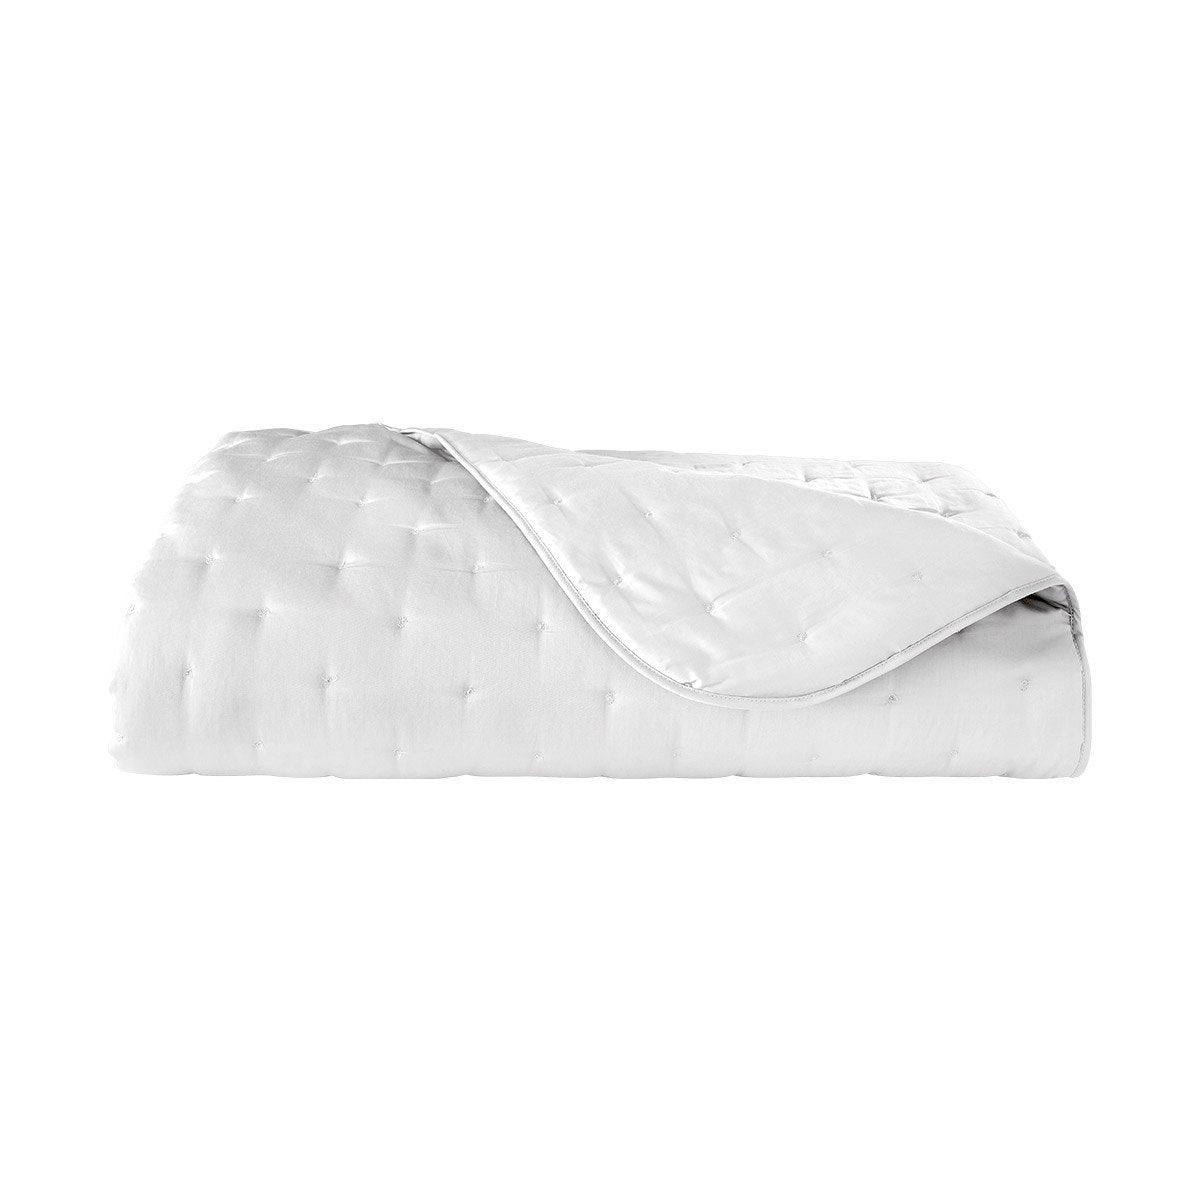 Fig Linens - Yves Delorme Triomphe Blanc Bedding - White Quilted Coverlet